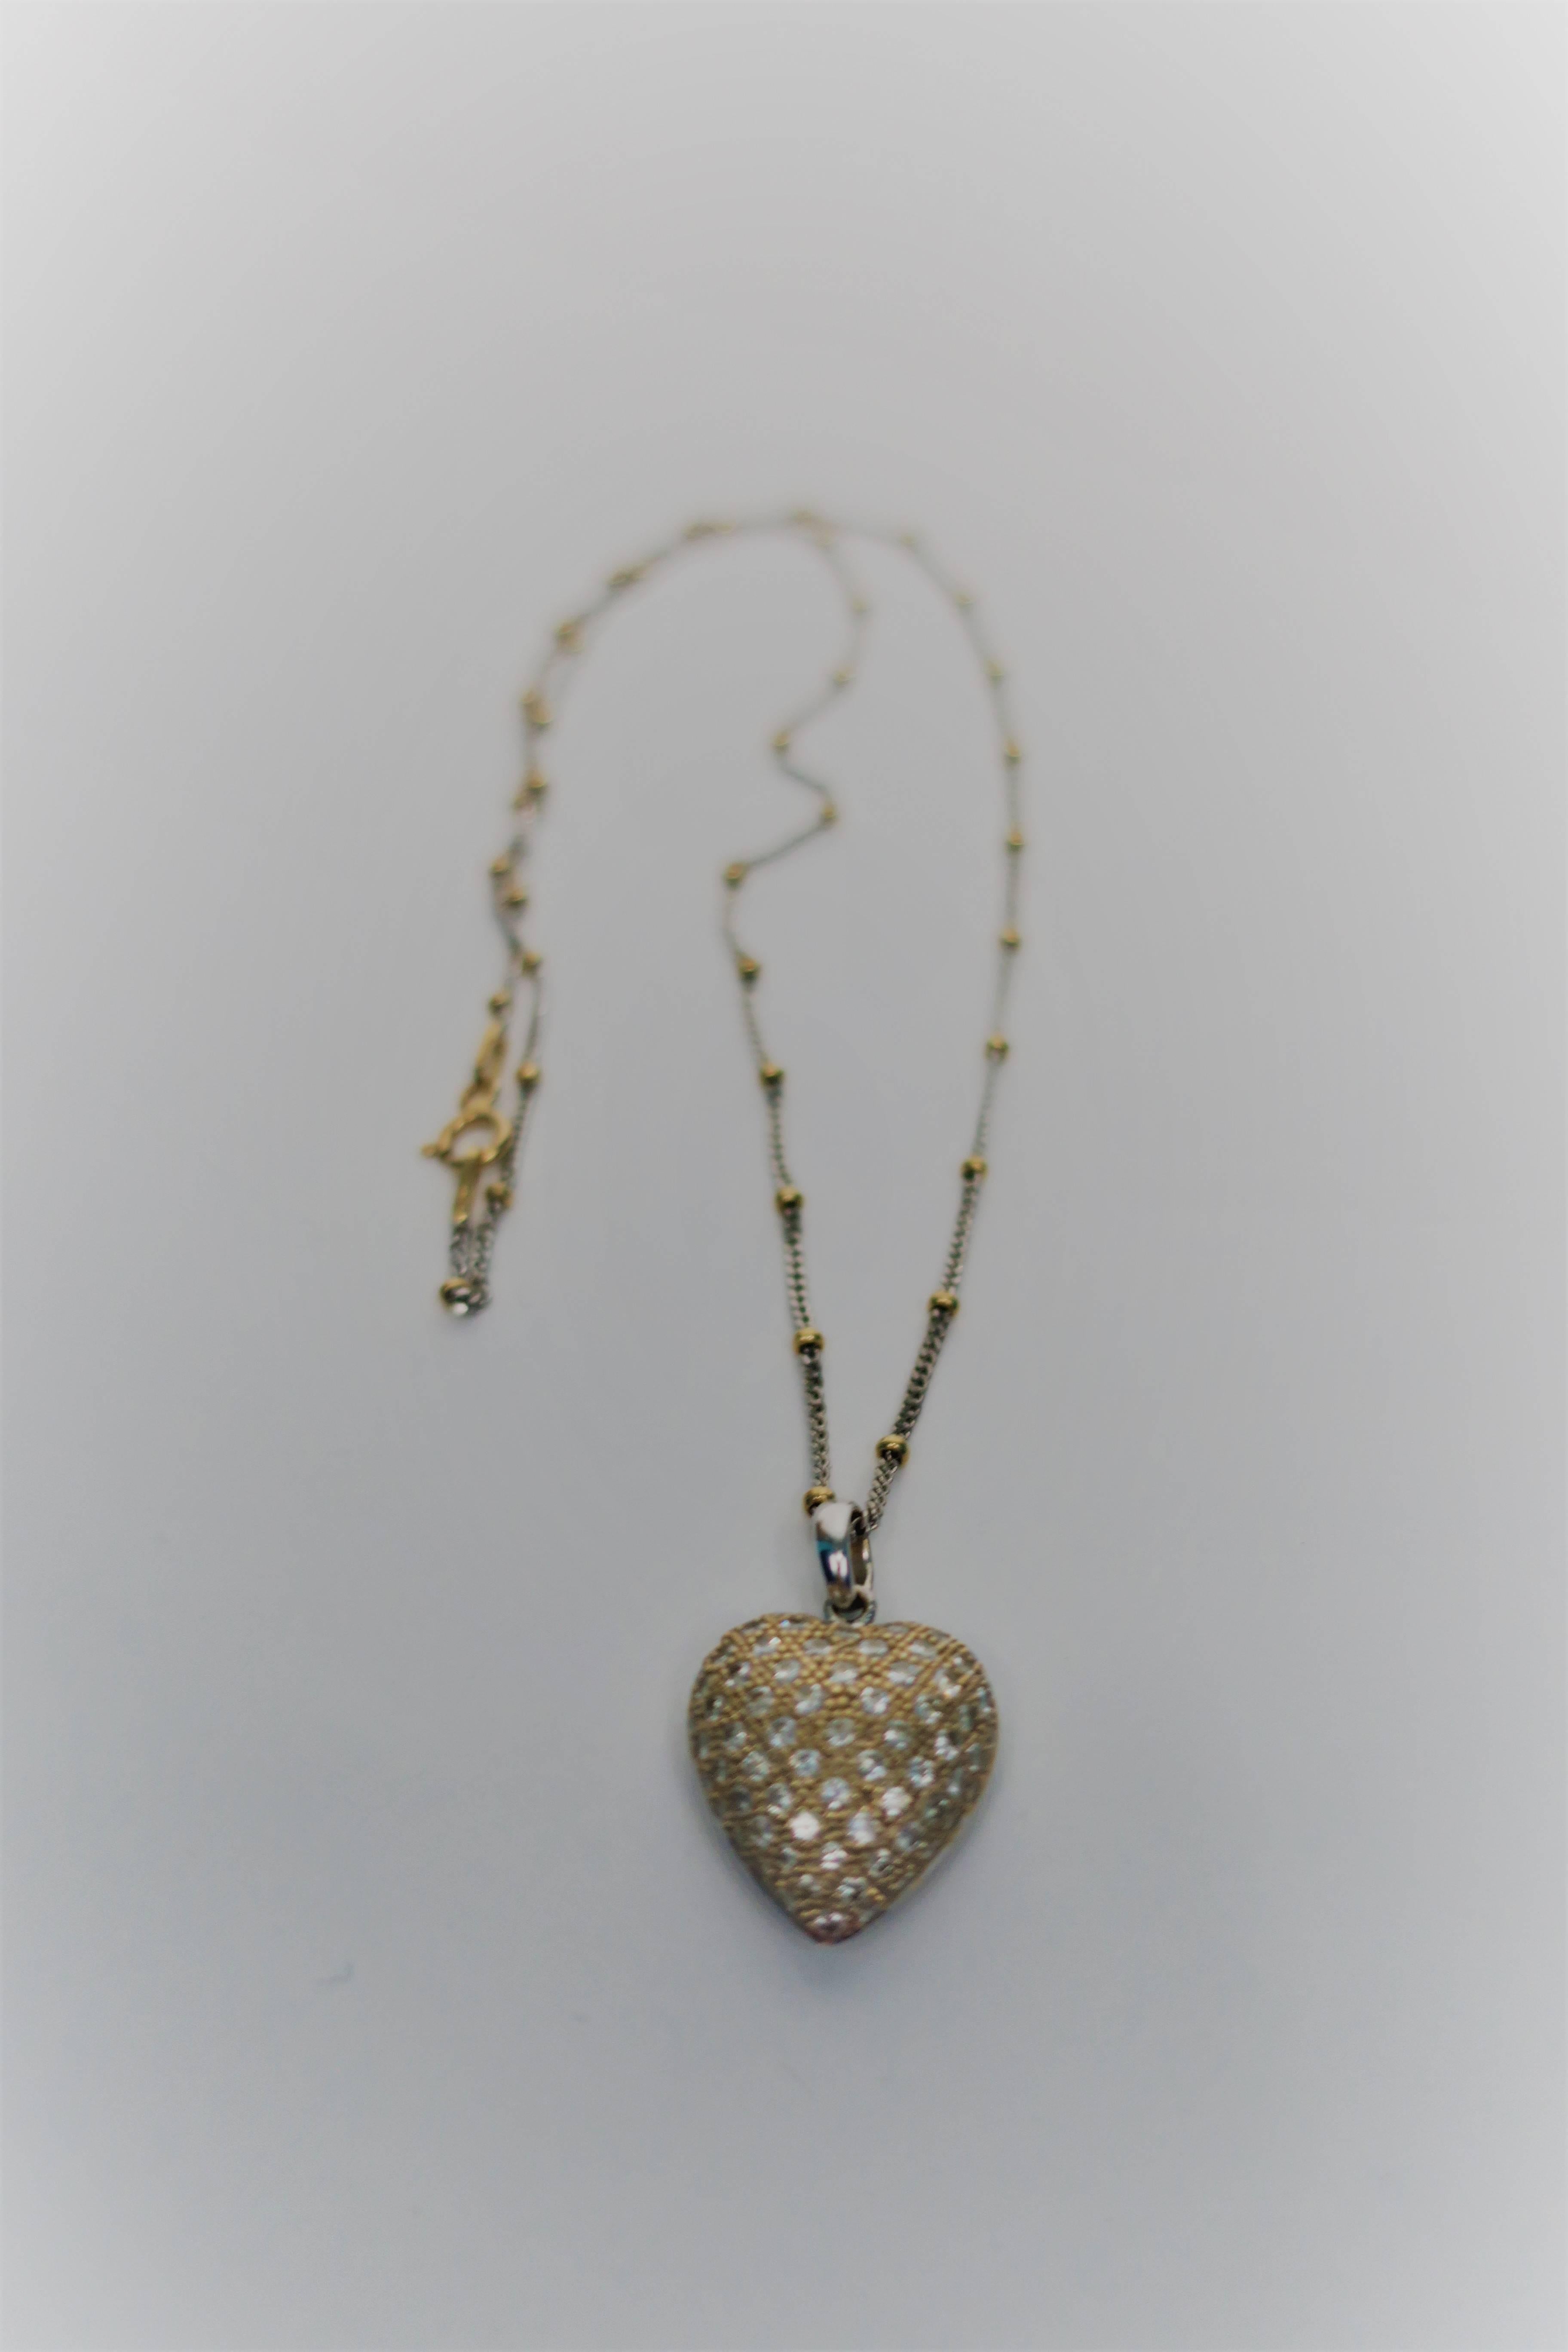 Pave Diamonds and 18 Karat Gold Pendant Heart Necklace in the Style of Cartier 2